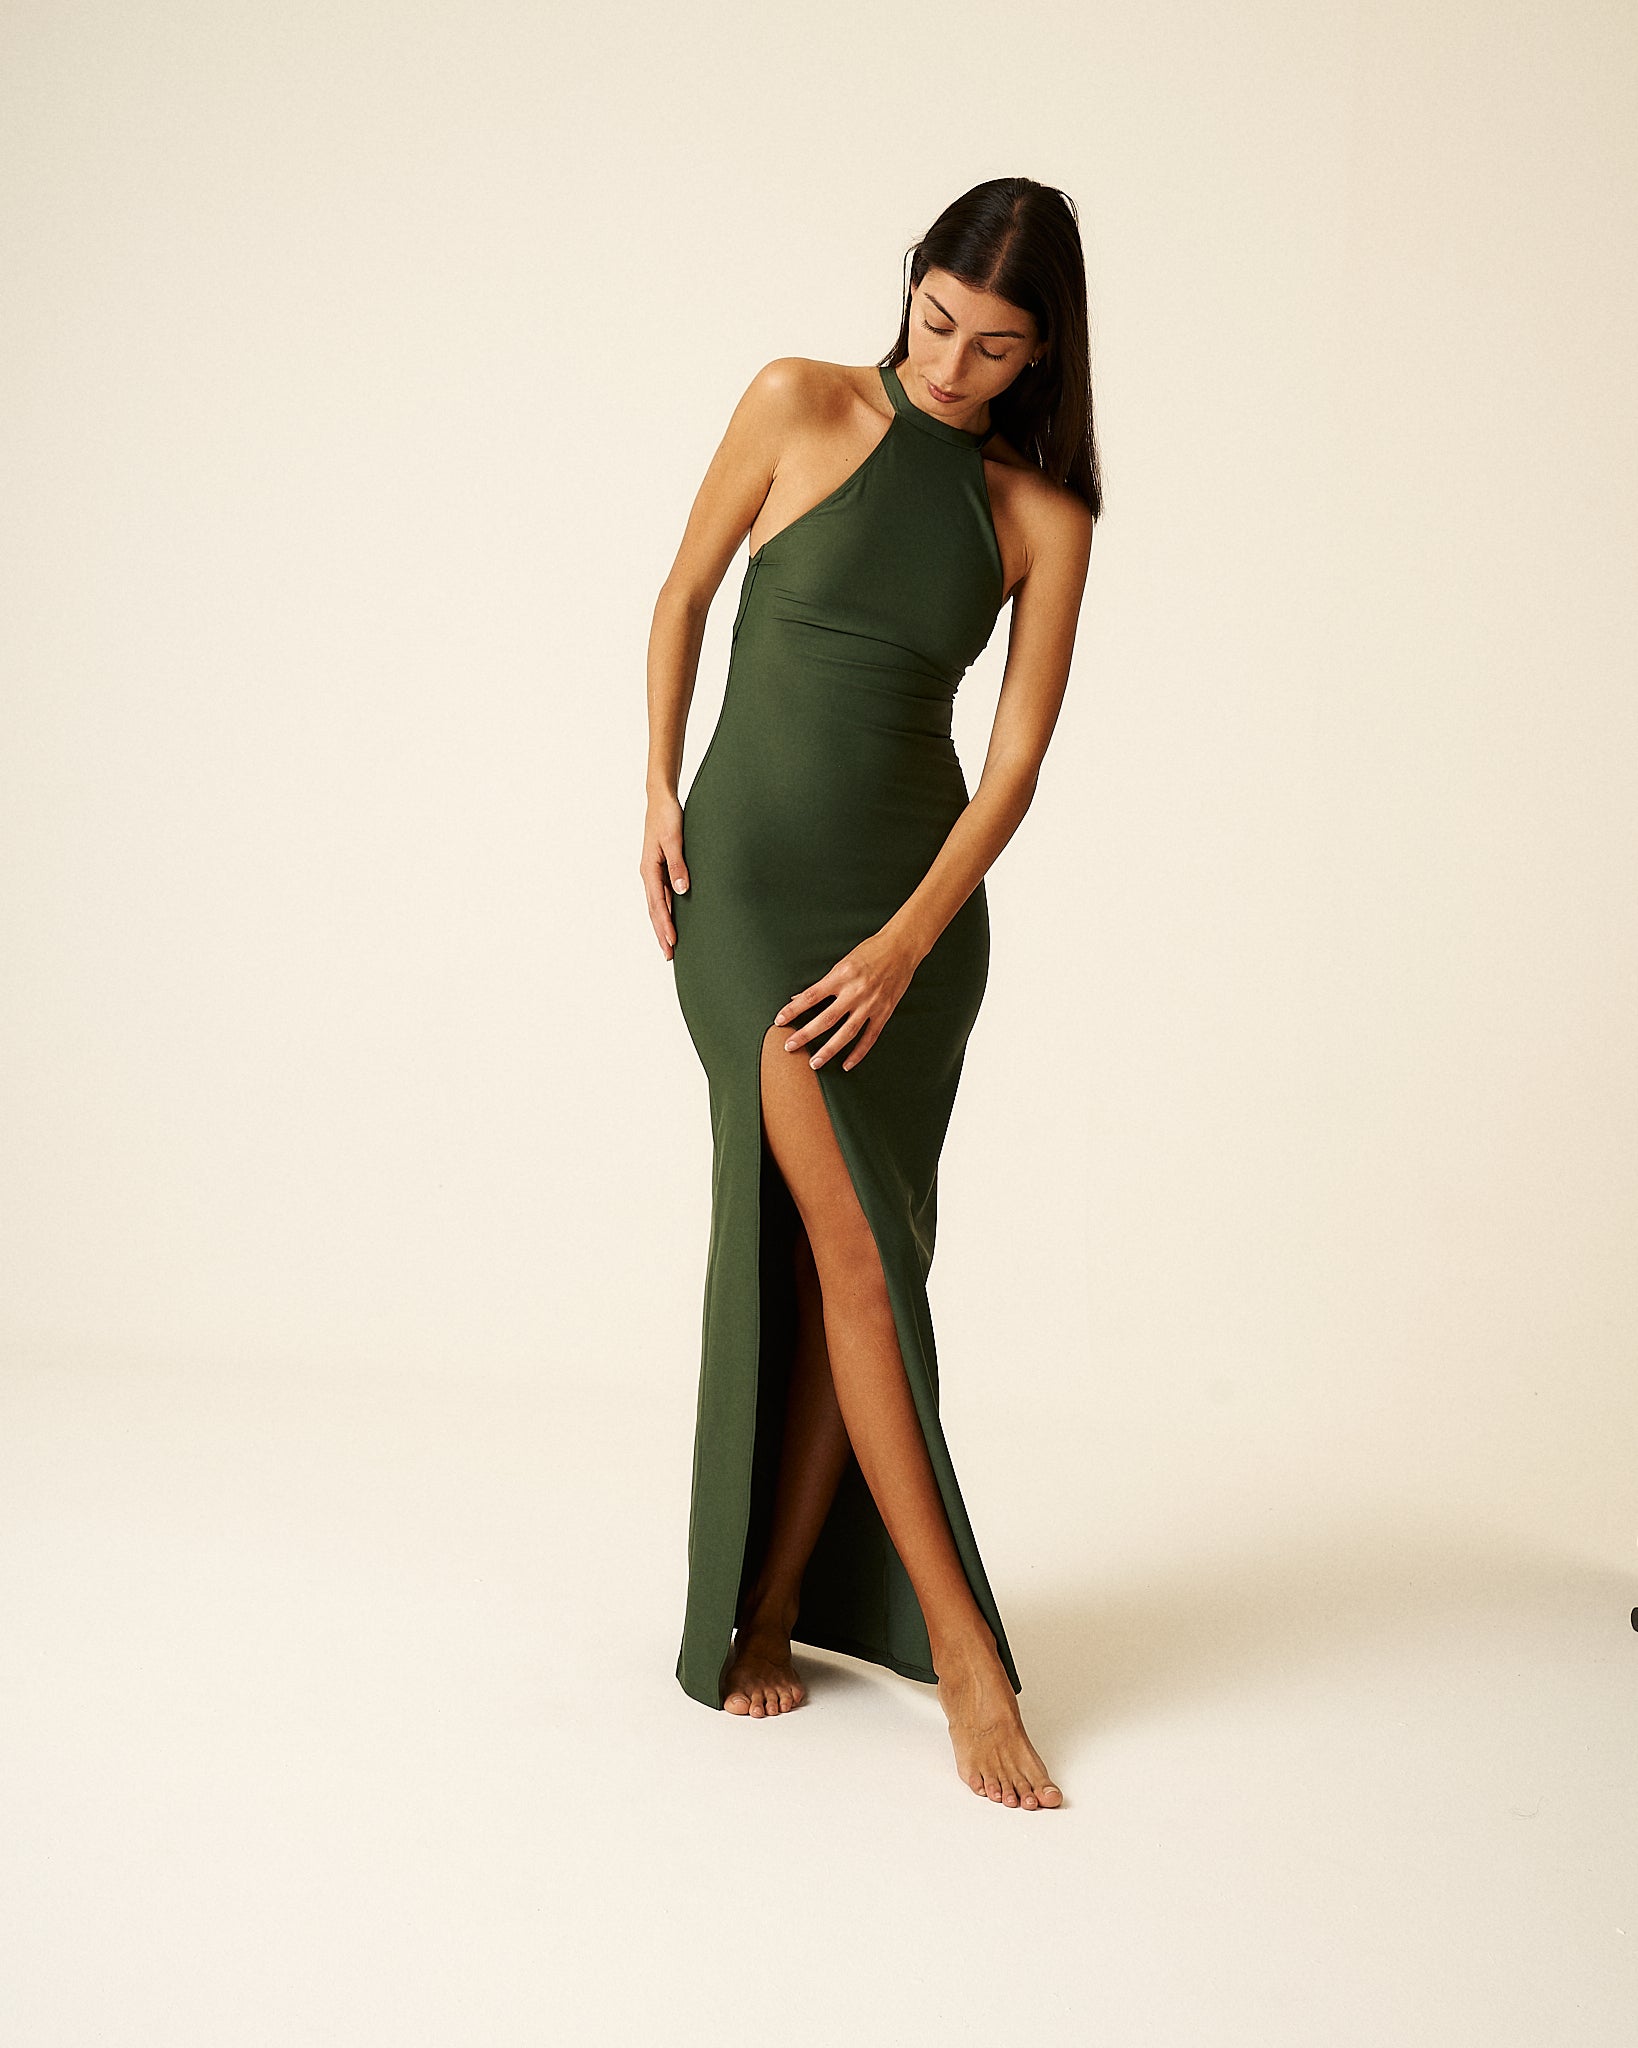 Discover Olivia, our exclusive sustainable luxury dress. Premium Econyl fiber offers elegance, comfort, and performance. Limited to 150 units, each certified and one-of-a-kind. Enjoy UPF50+ skin protection. Elevate fashion with purpose and indulge in our exquisite limited edition dresses. Green